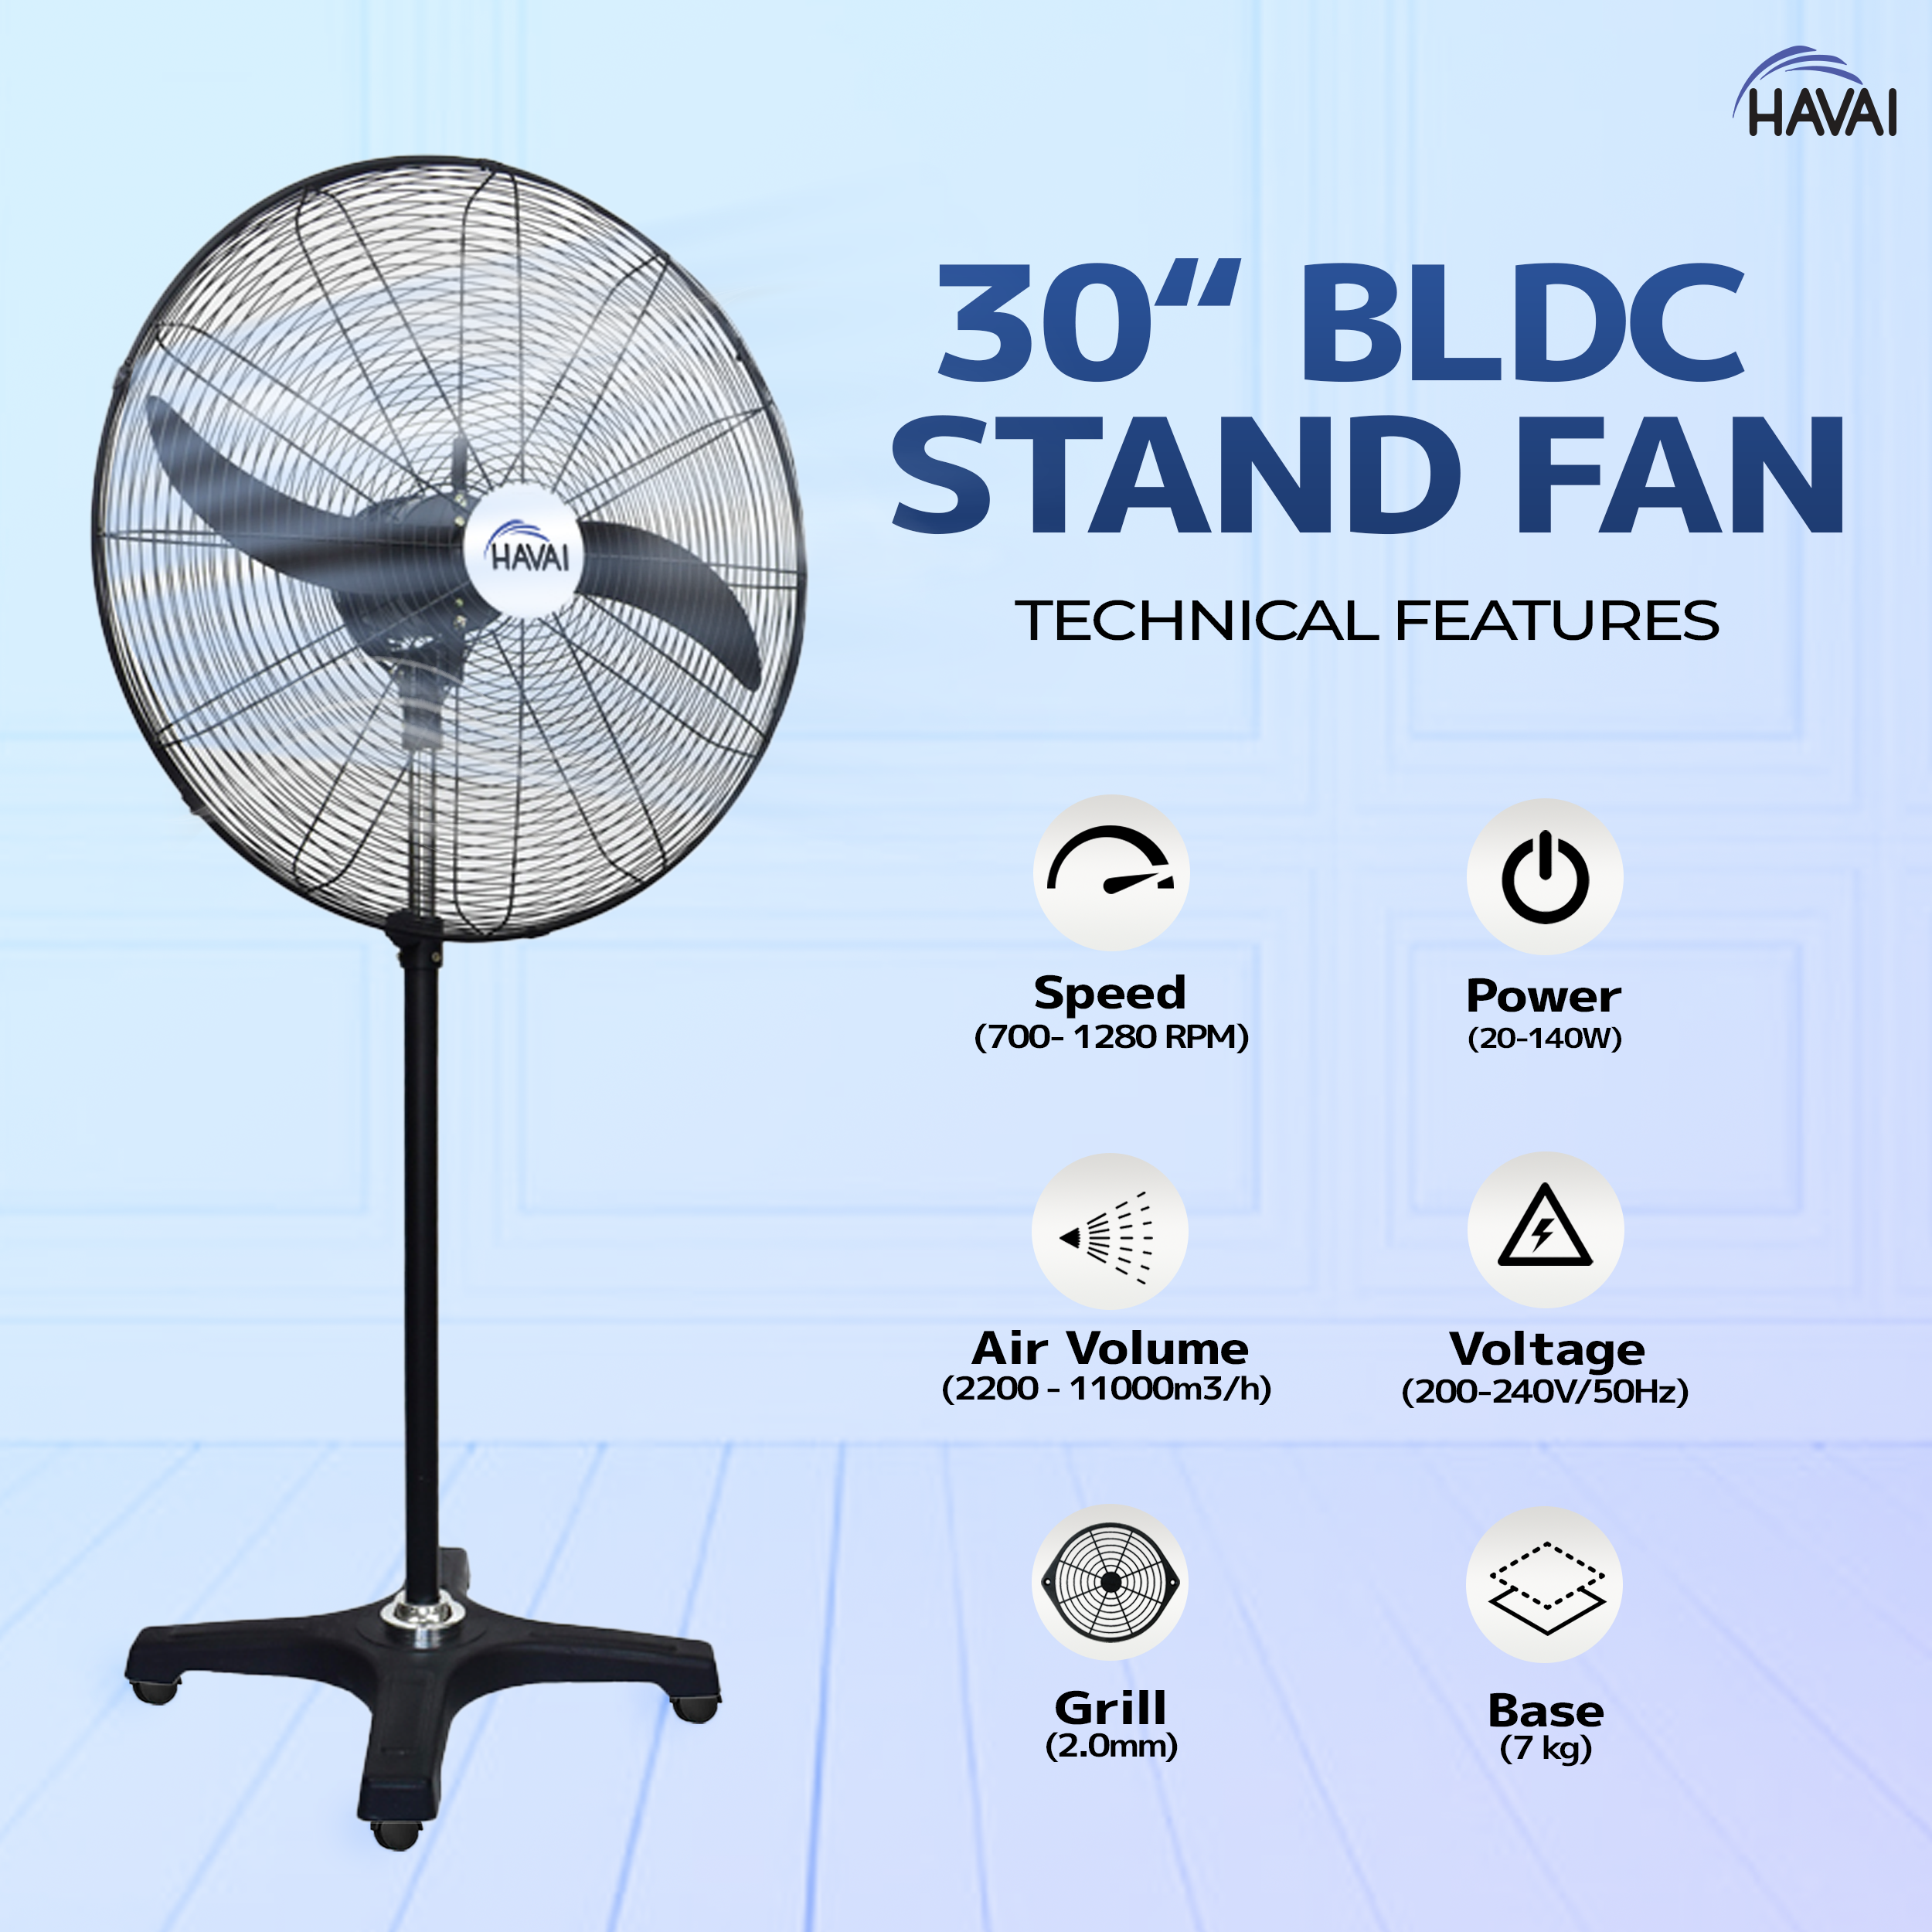 Havai BLDC Pedestal Fan 30 Inch, 50% Savings On Electricity, High Velocity, Heavy Duty Metal For Industrial, Commercial And Residential Use, Assembly Included , Black